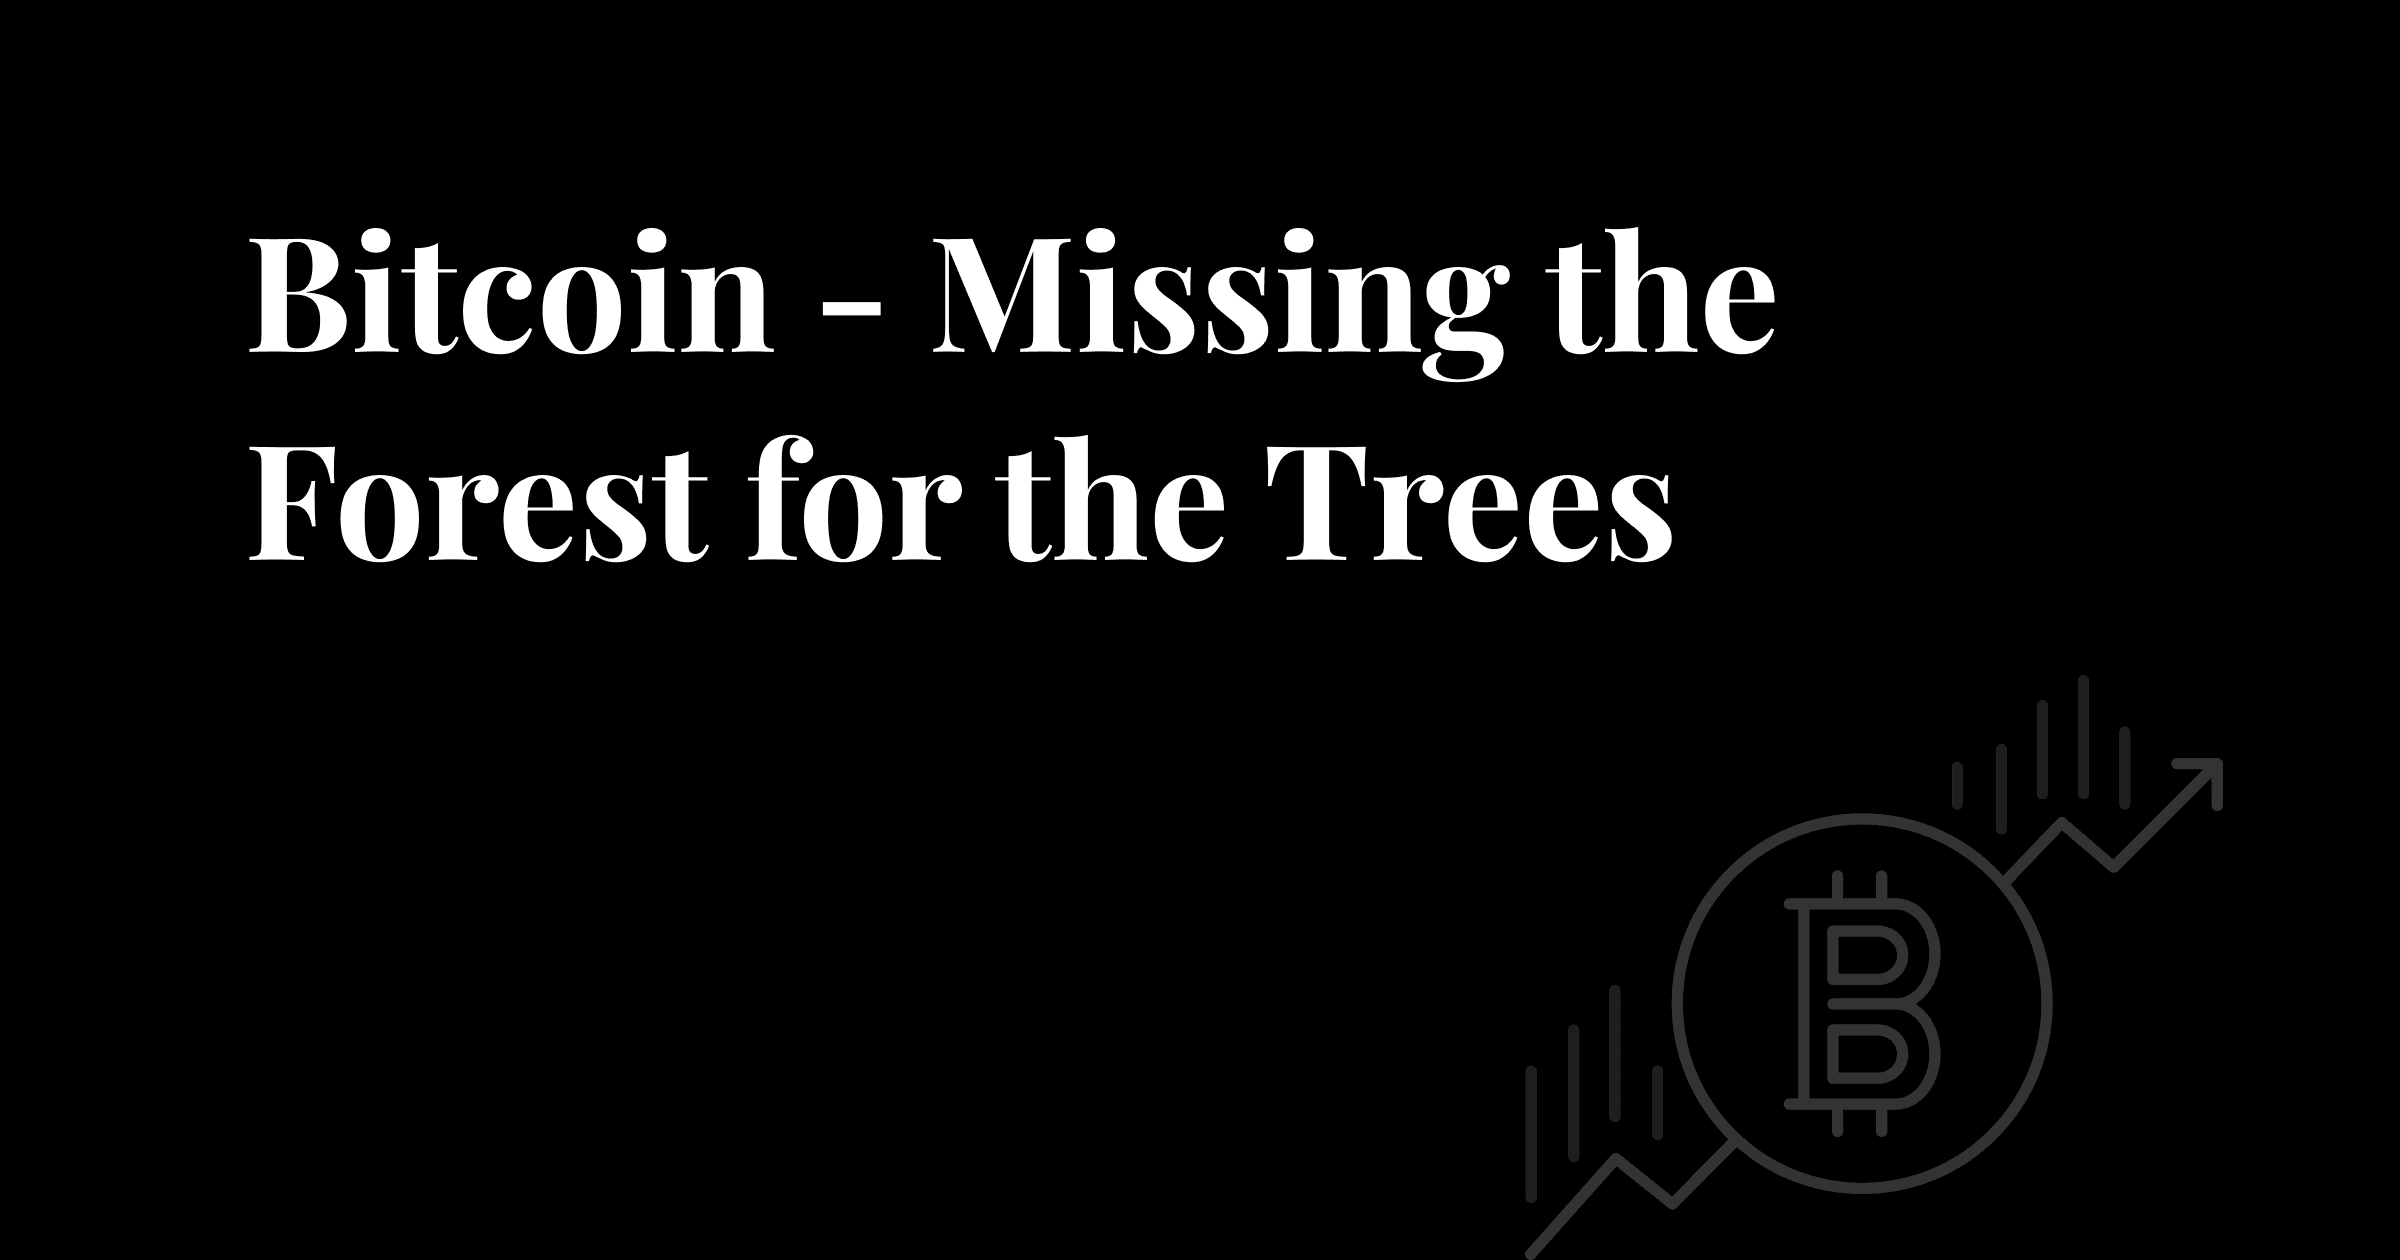 Article image - Bitcoin - Missing the Forest For the Trees